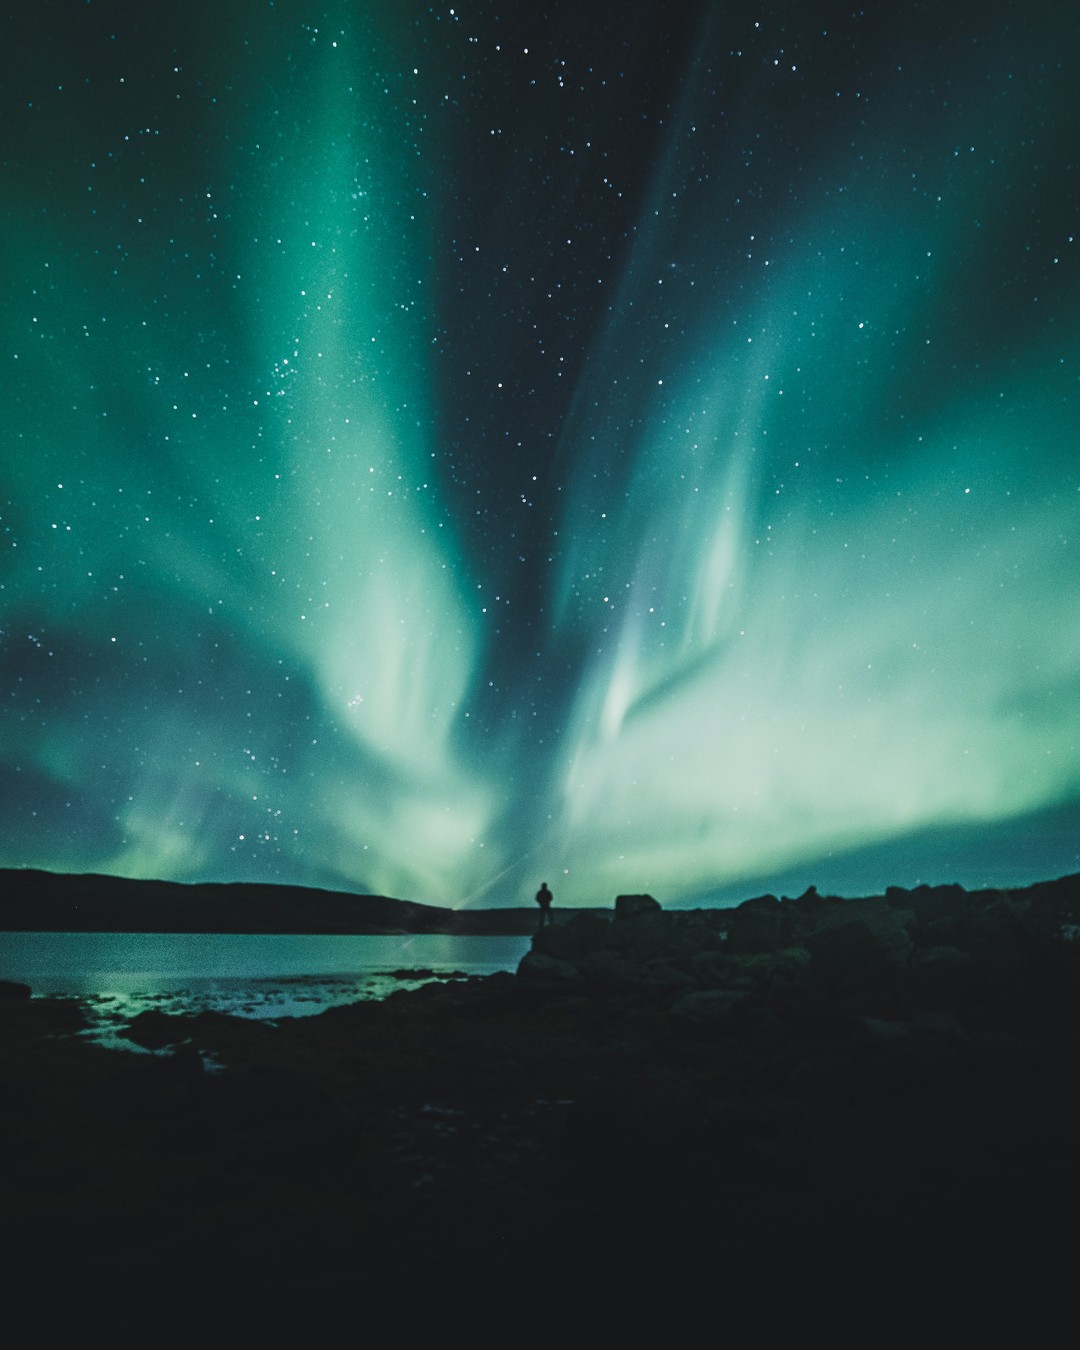 The Northern Lights: One of the best romantic getaways for couples who love nature.